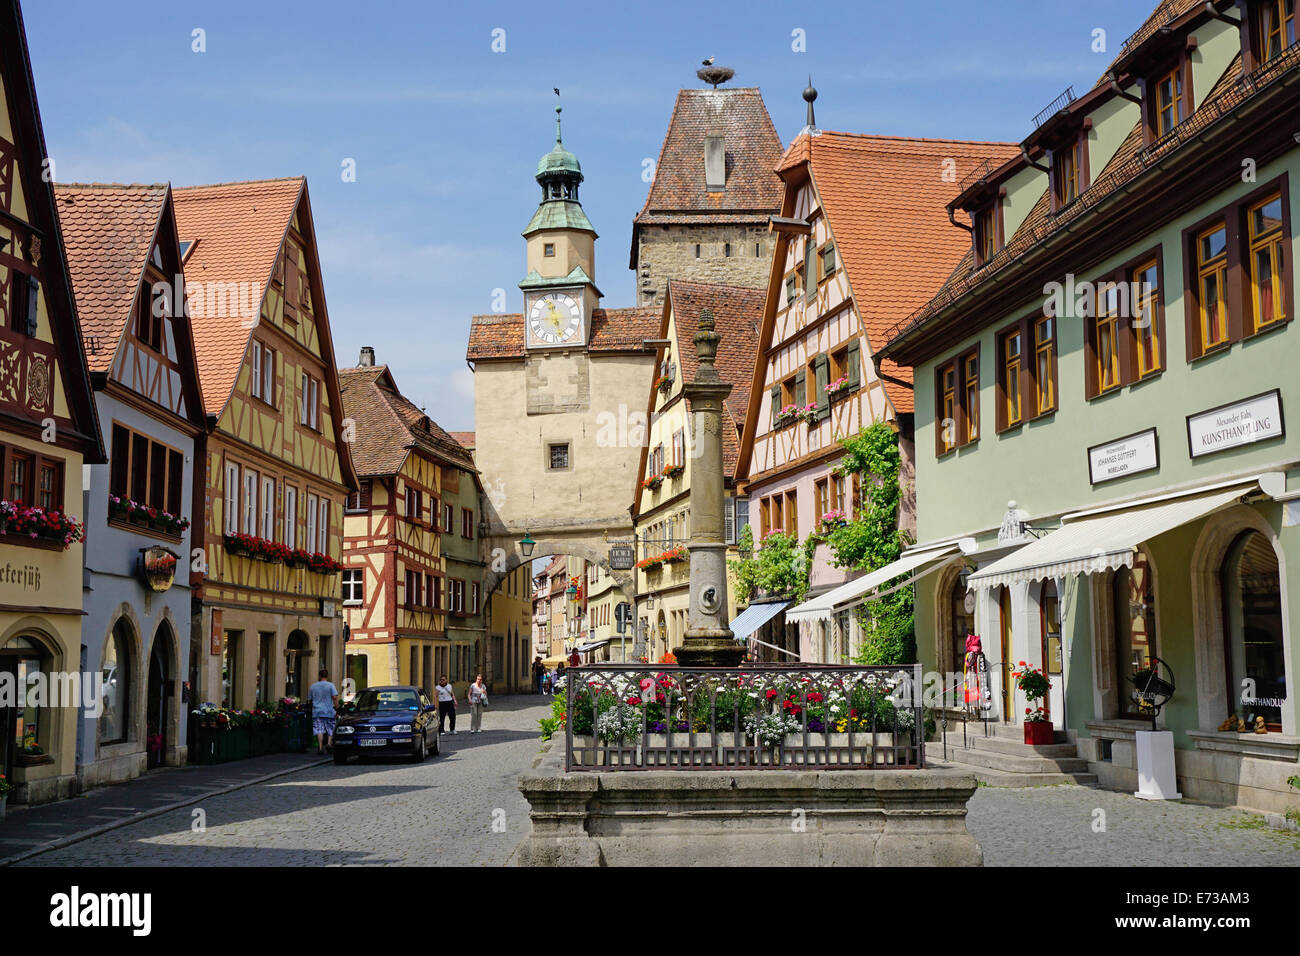 Markus Tower and Roder arch, Rothenburg ob der Tauber, Romantic Road, Franconia, Bavaria, Germany, Europe Stock Photo